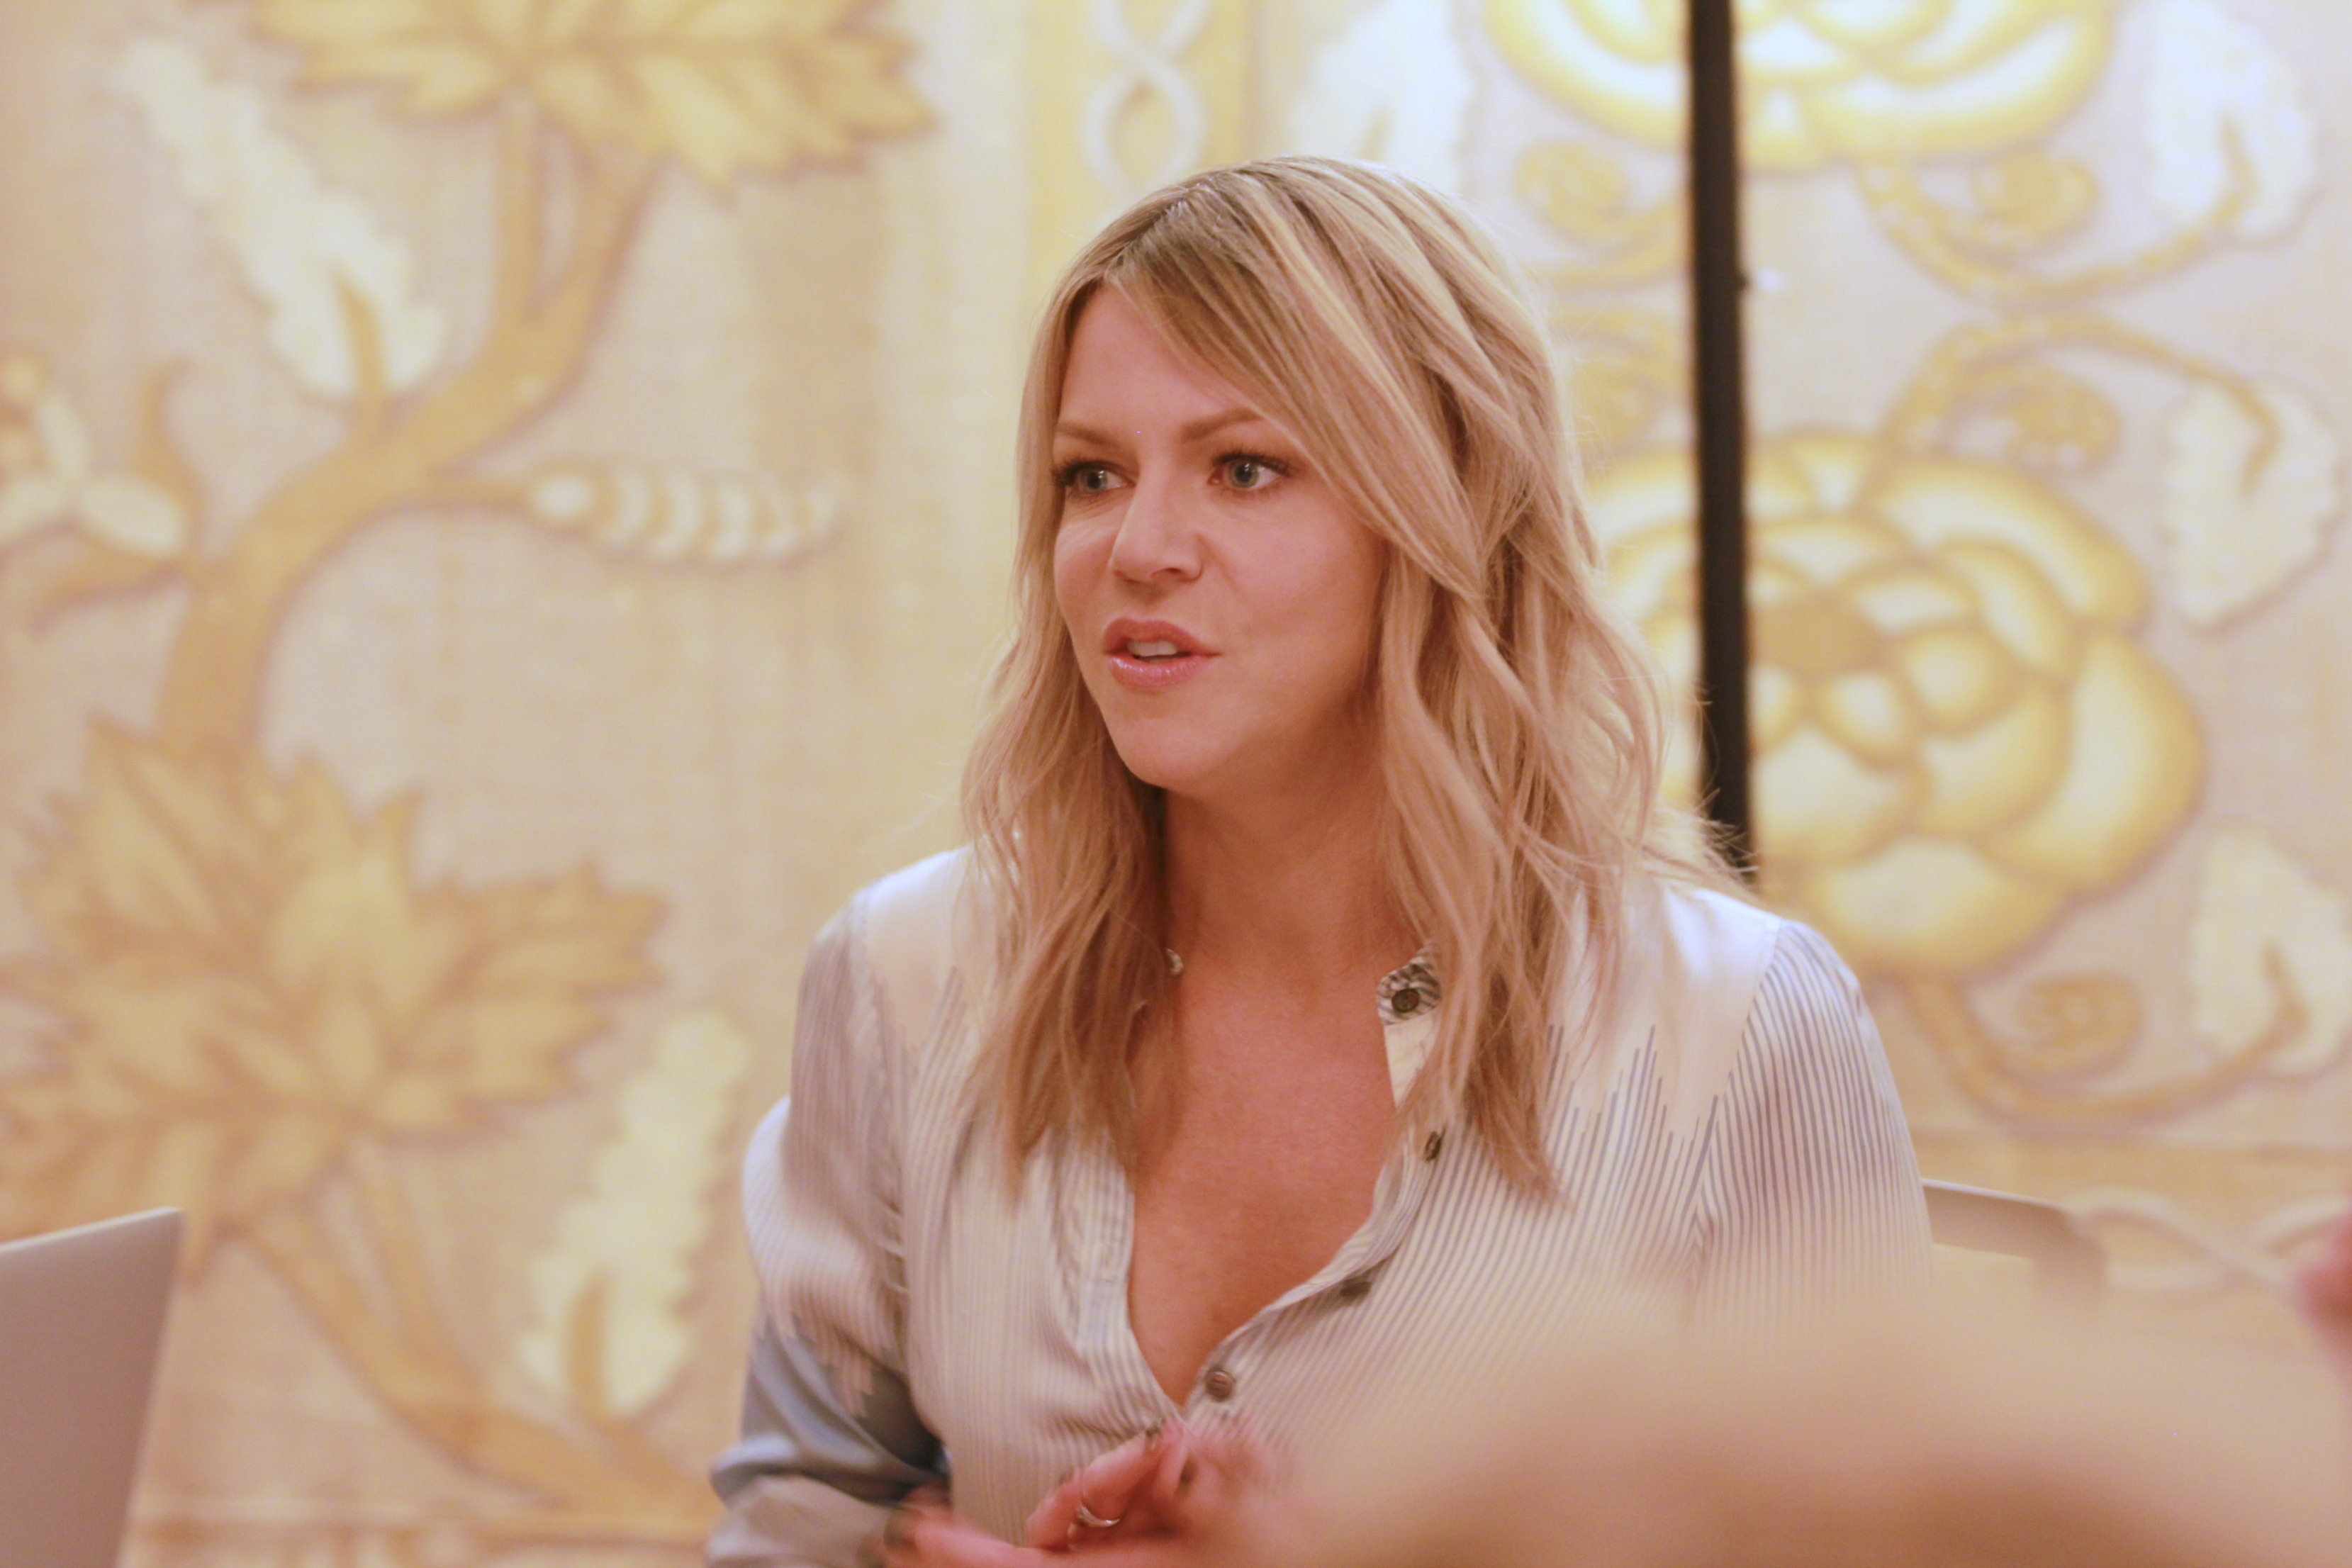 Talking with Kaitlin Olson about Finding Dory #FindingDoryEvent